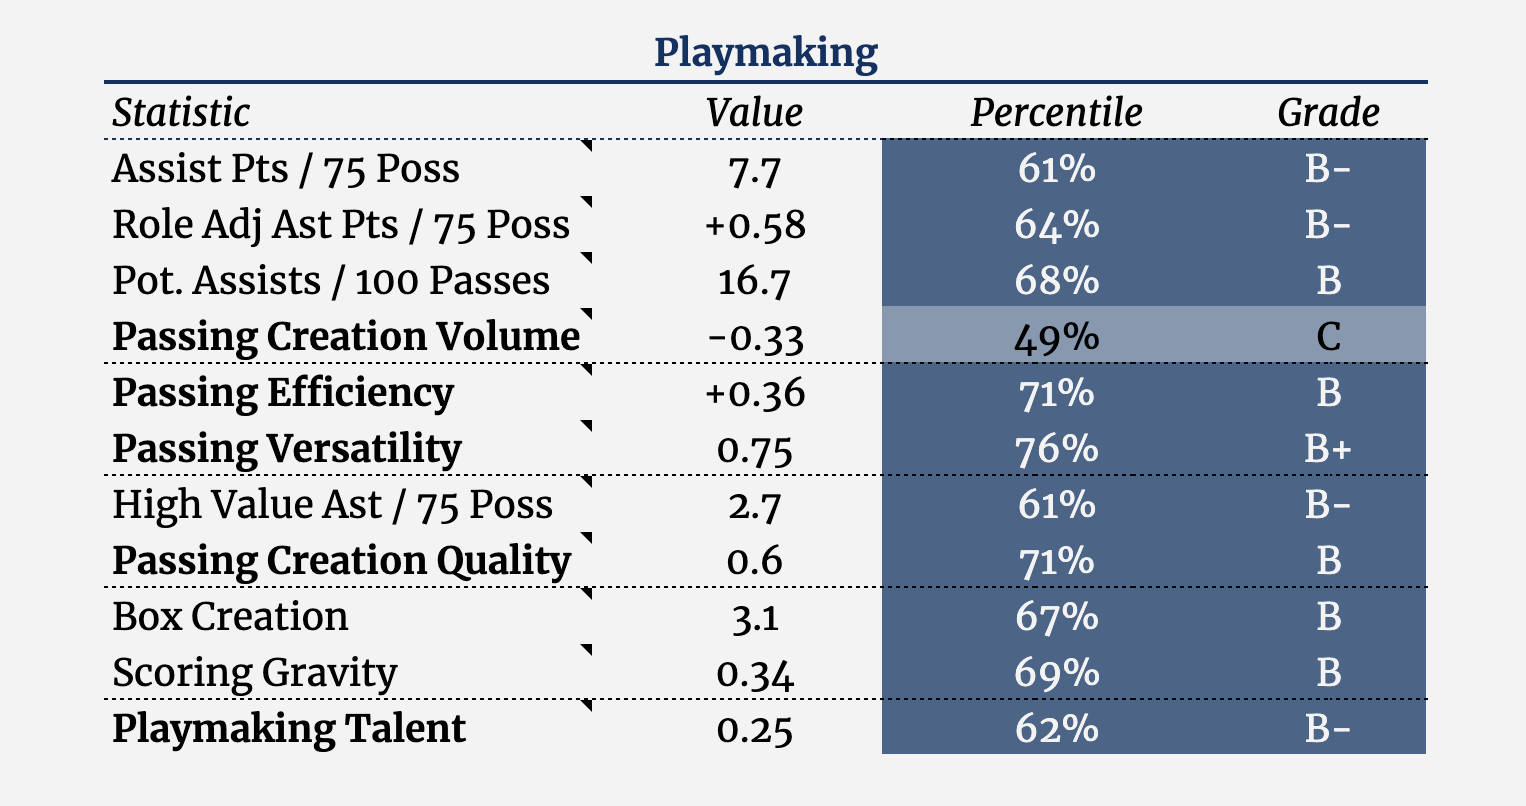 Mikal Bridges' playmaking metrics, according to The Bball Index.